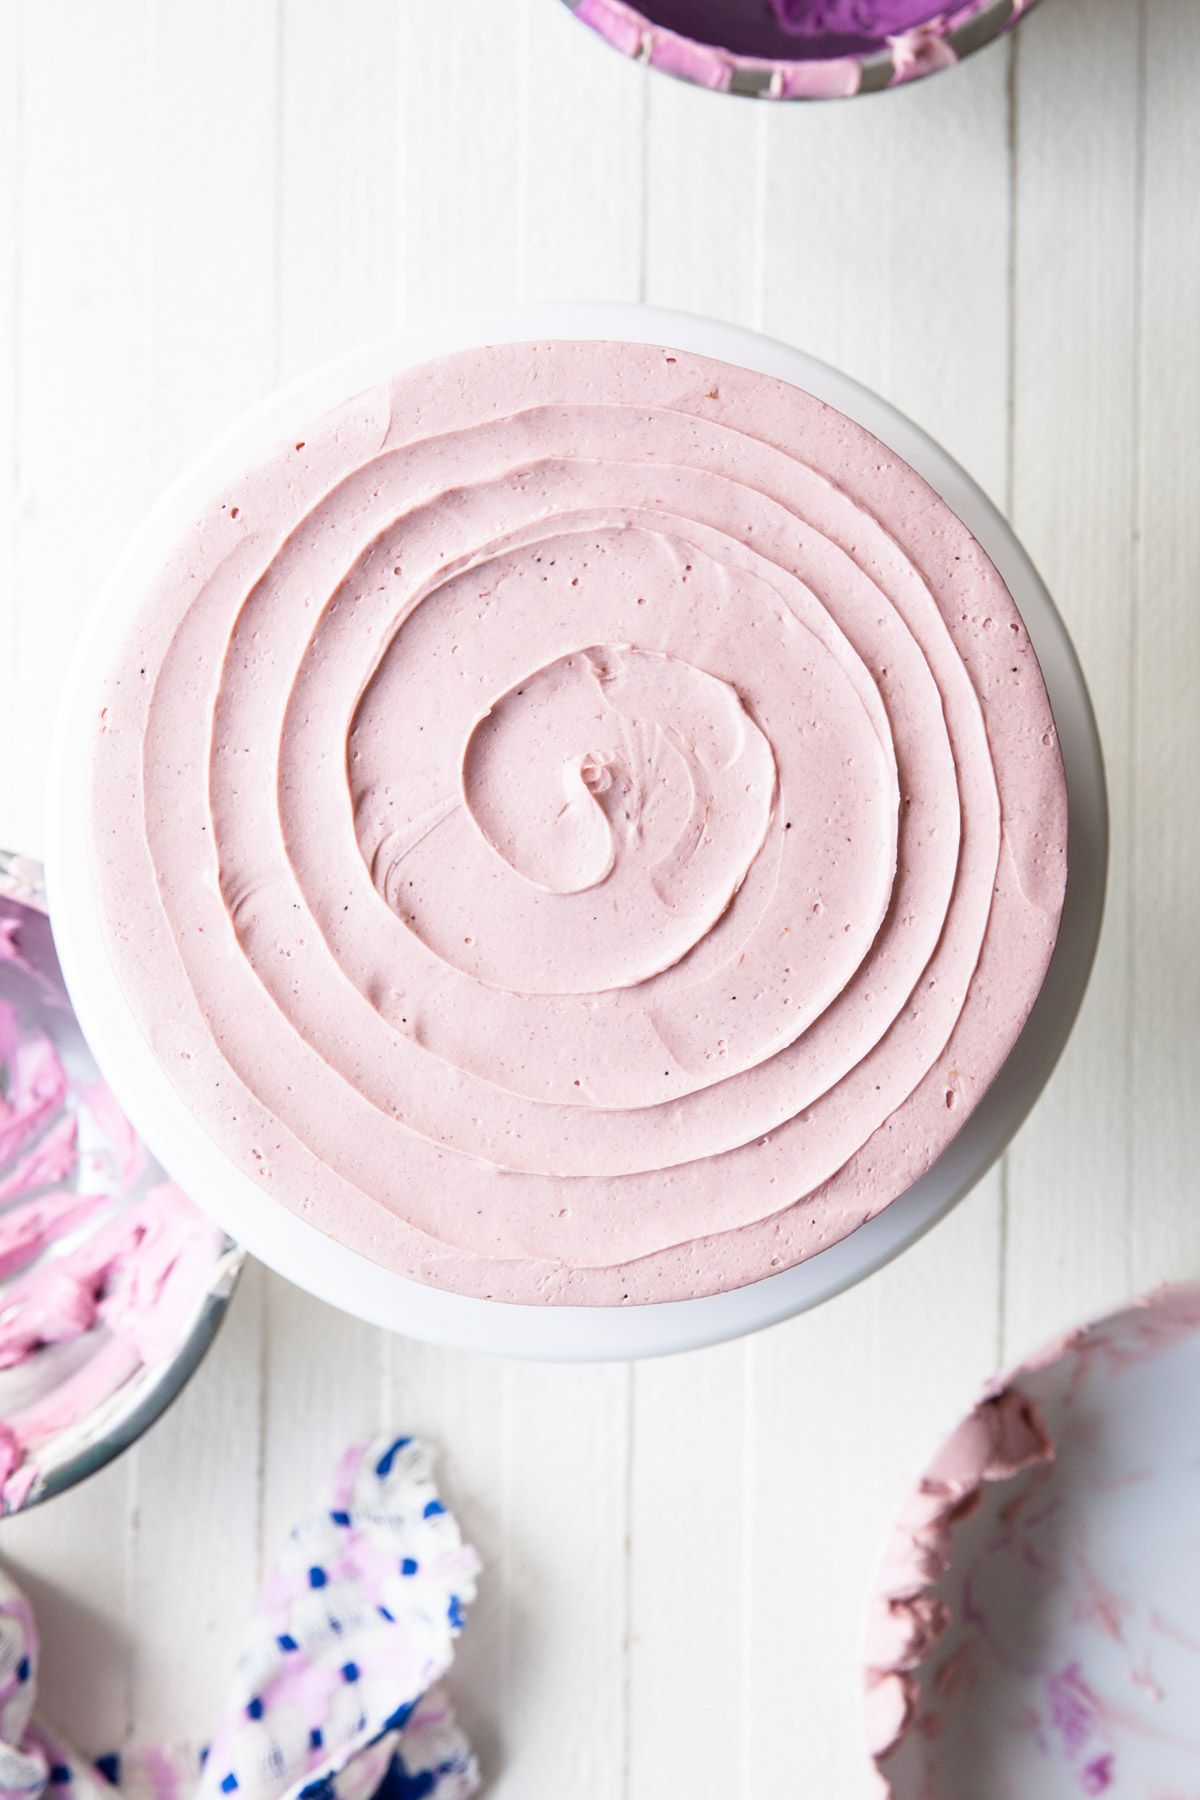 A buttercream swirl on top of a layer cake.